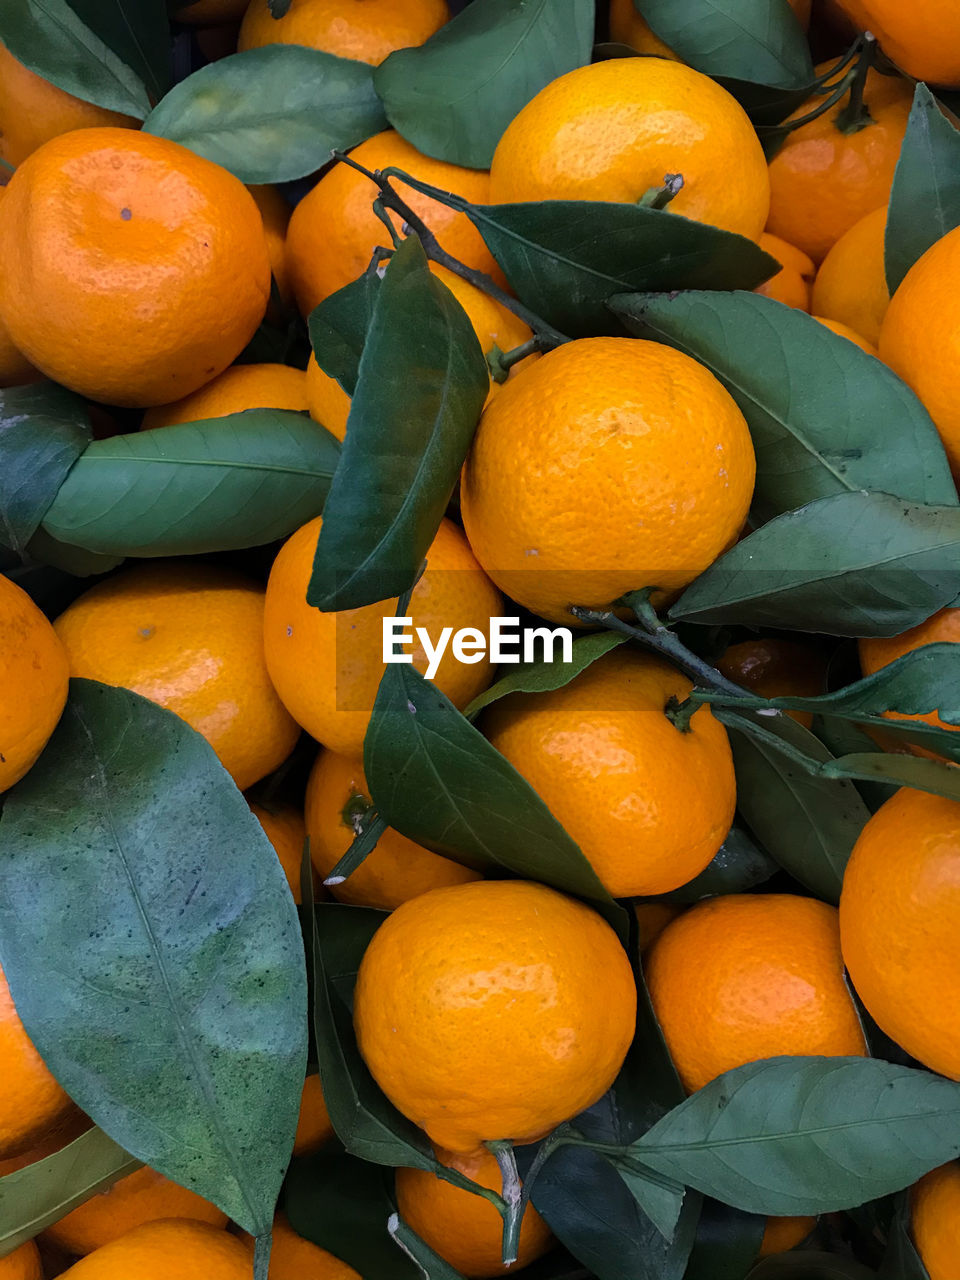 HIGH ANGLE VIEW OF ORANGES IN MARKET